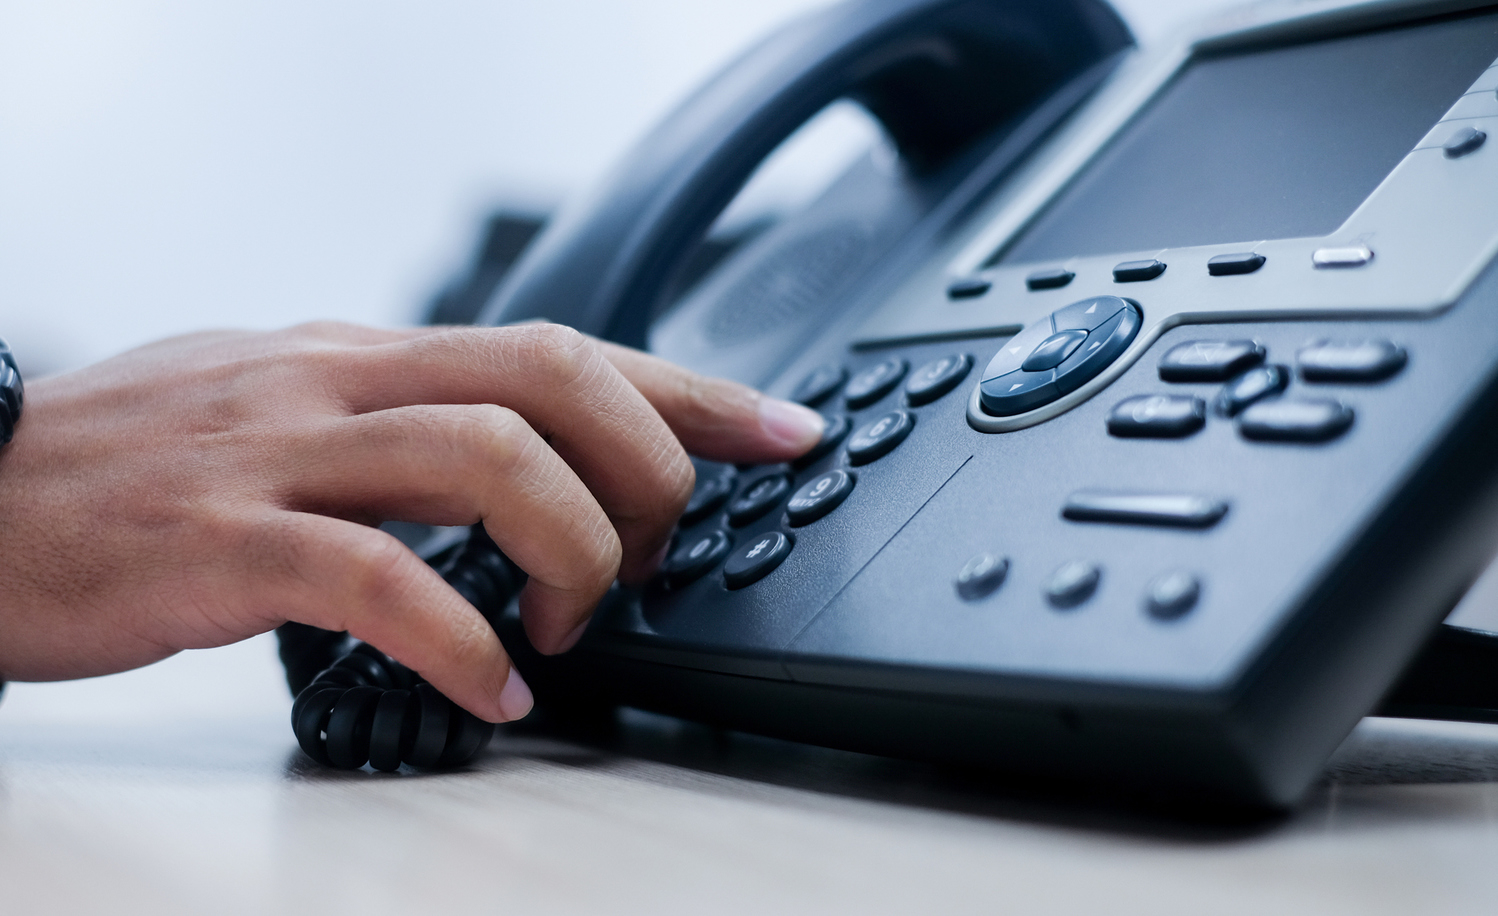 Cellular Phone Service, VoIP and Landline Pros And Cons